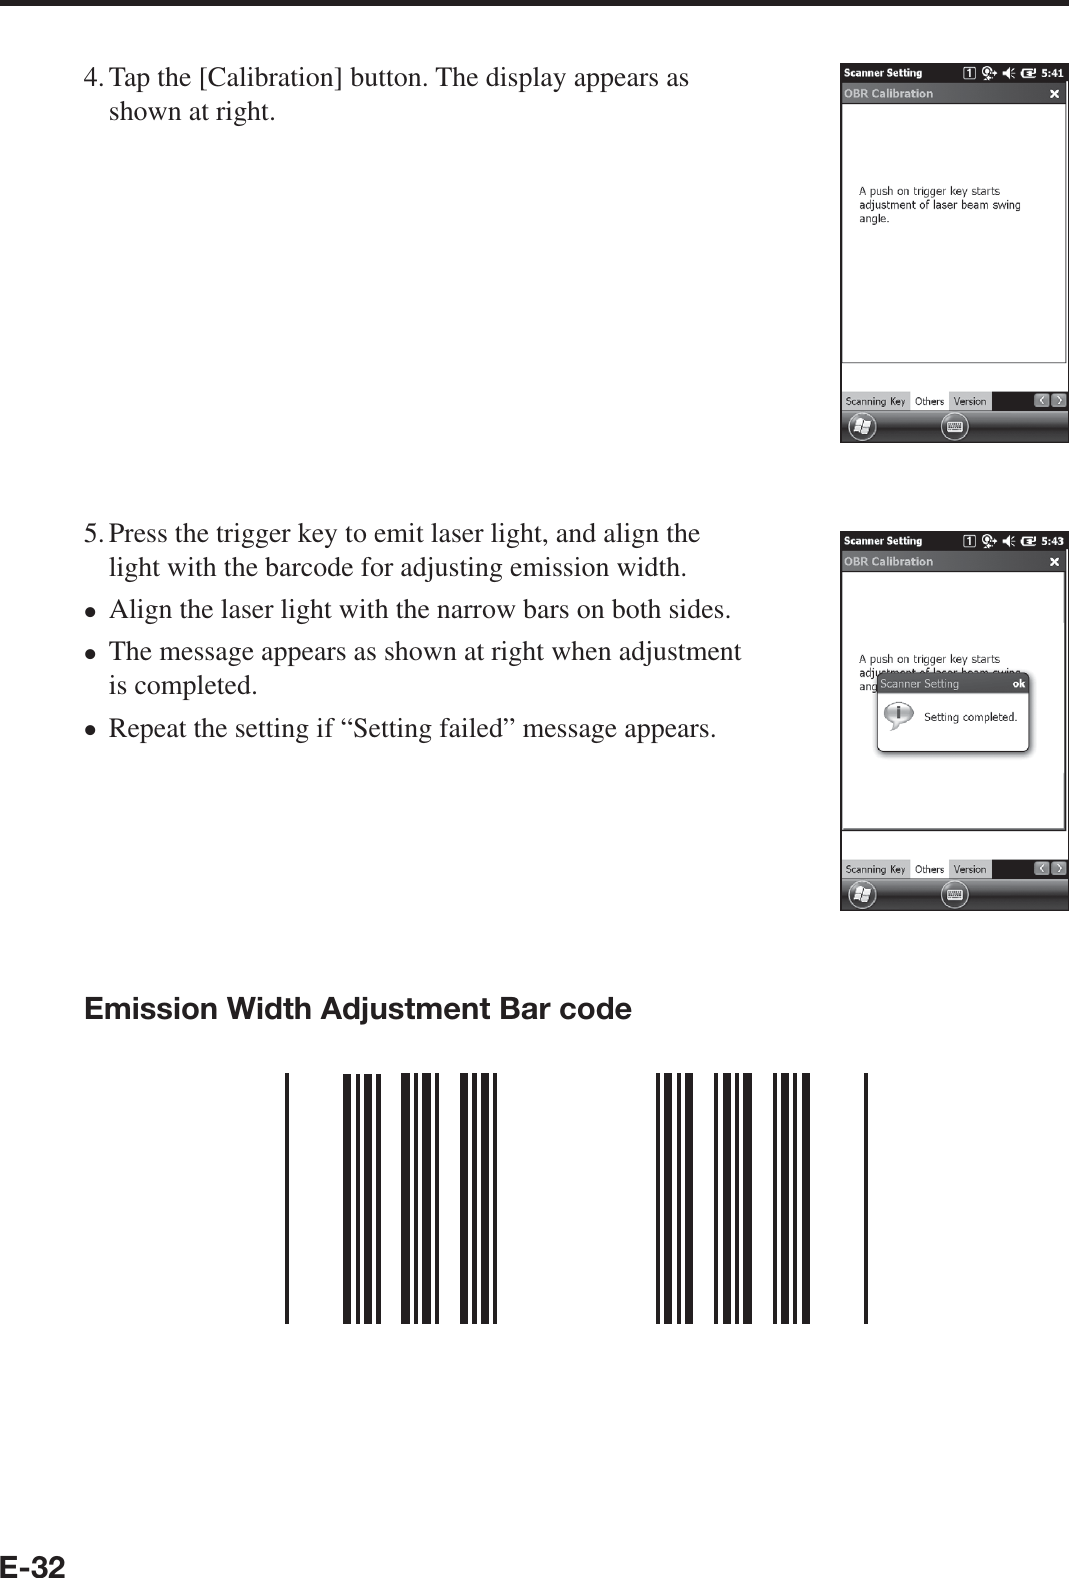 E-324. Tap the [Calibration] button. The display appears as shown at right.5. Press the trigger key to emit laser light, and align the light with the barcode for adjusting emission width.Align the laser light with the narrow bars on both sides.The message appears as shown at right when adjustment is completed.Repeat the setting if “Setting failed” message appears.Emission Width Adjustment Bar code•••